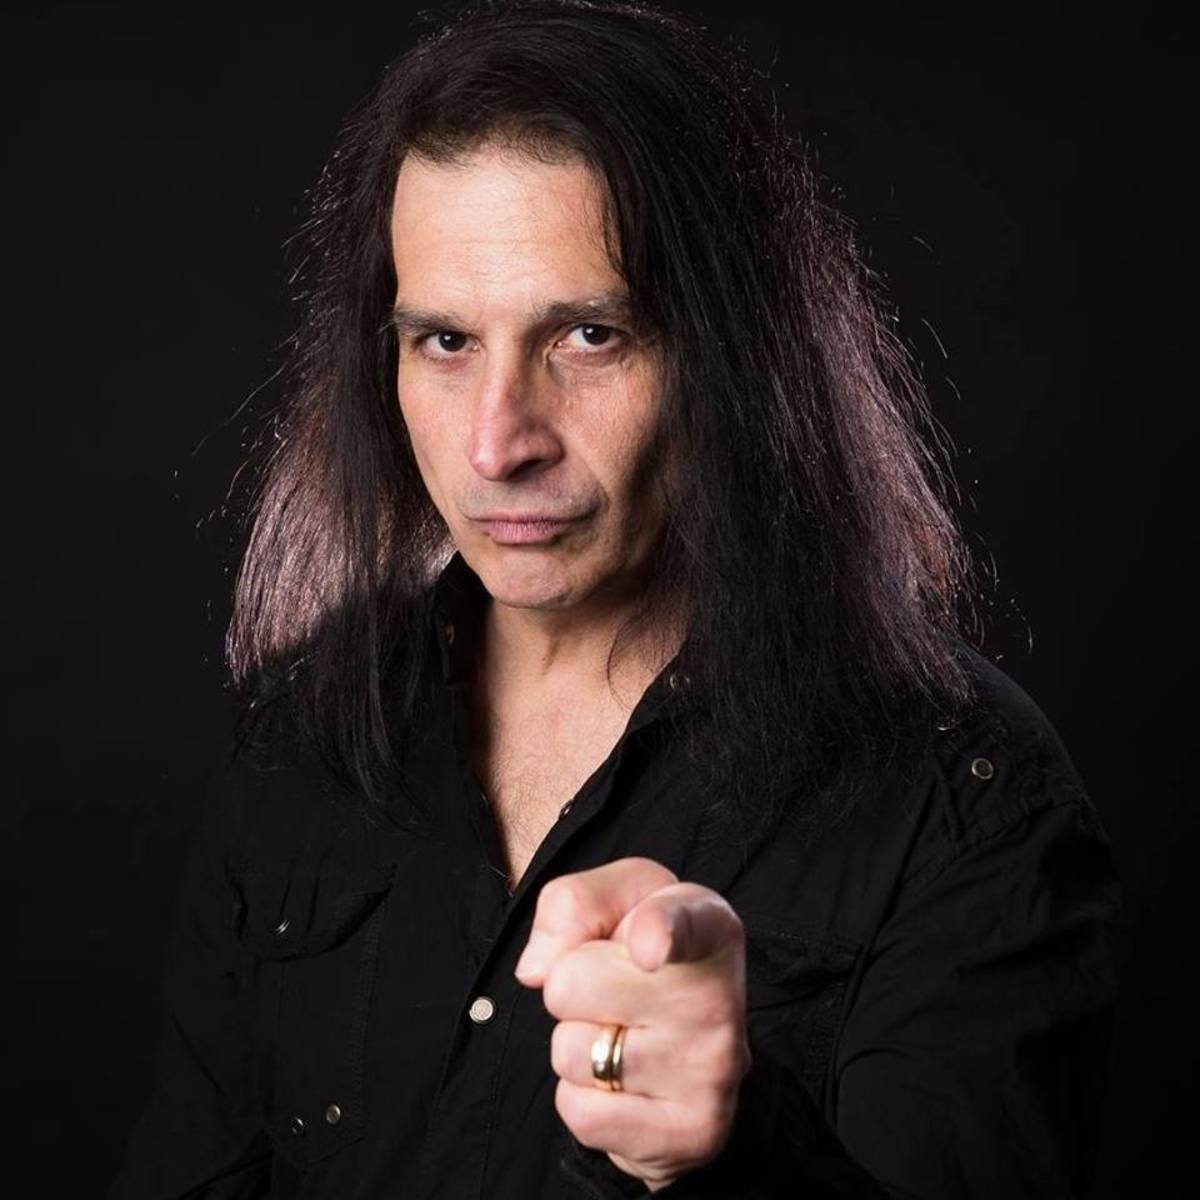 Michael Vescera, the same vocalist that was once a member of the Japanese rock band Loudness performed lead vocals for Yngwie J. Malmsteen on the albums Magnum Opus & The Seventh Sign.